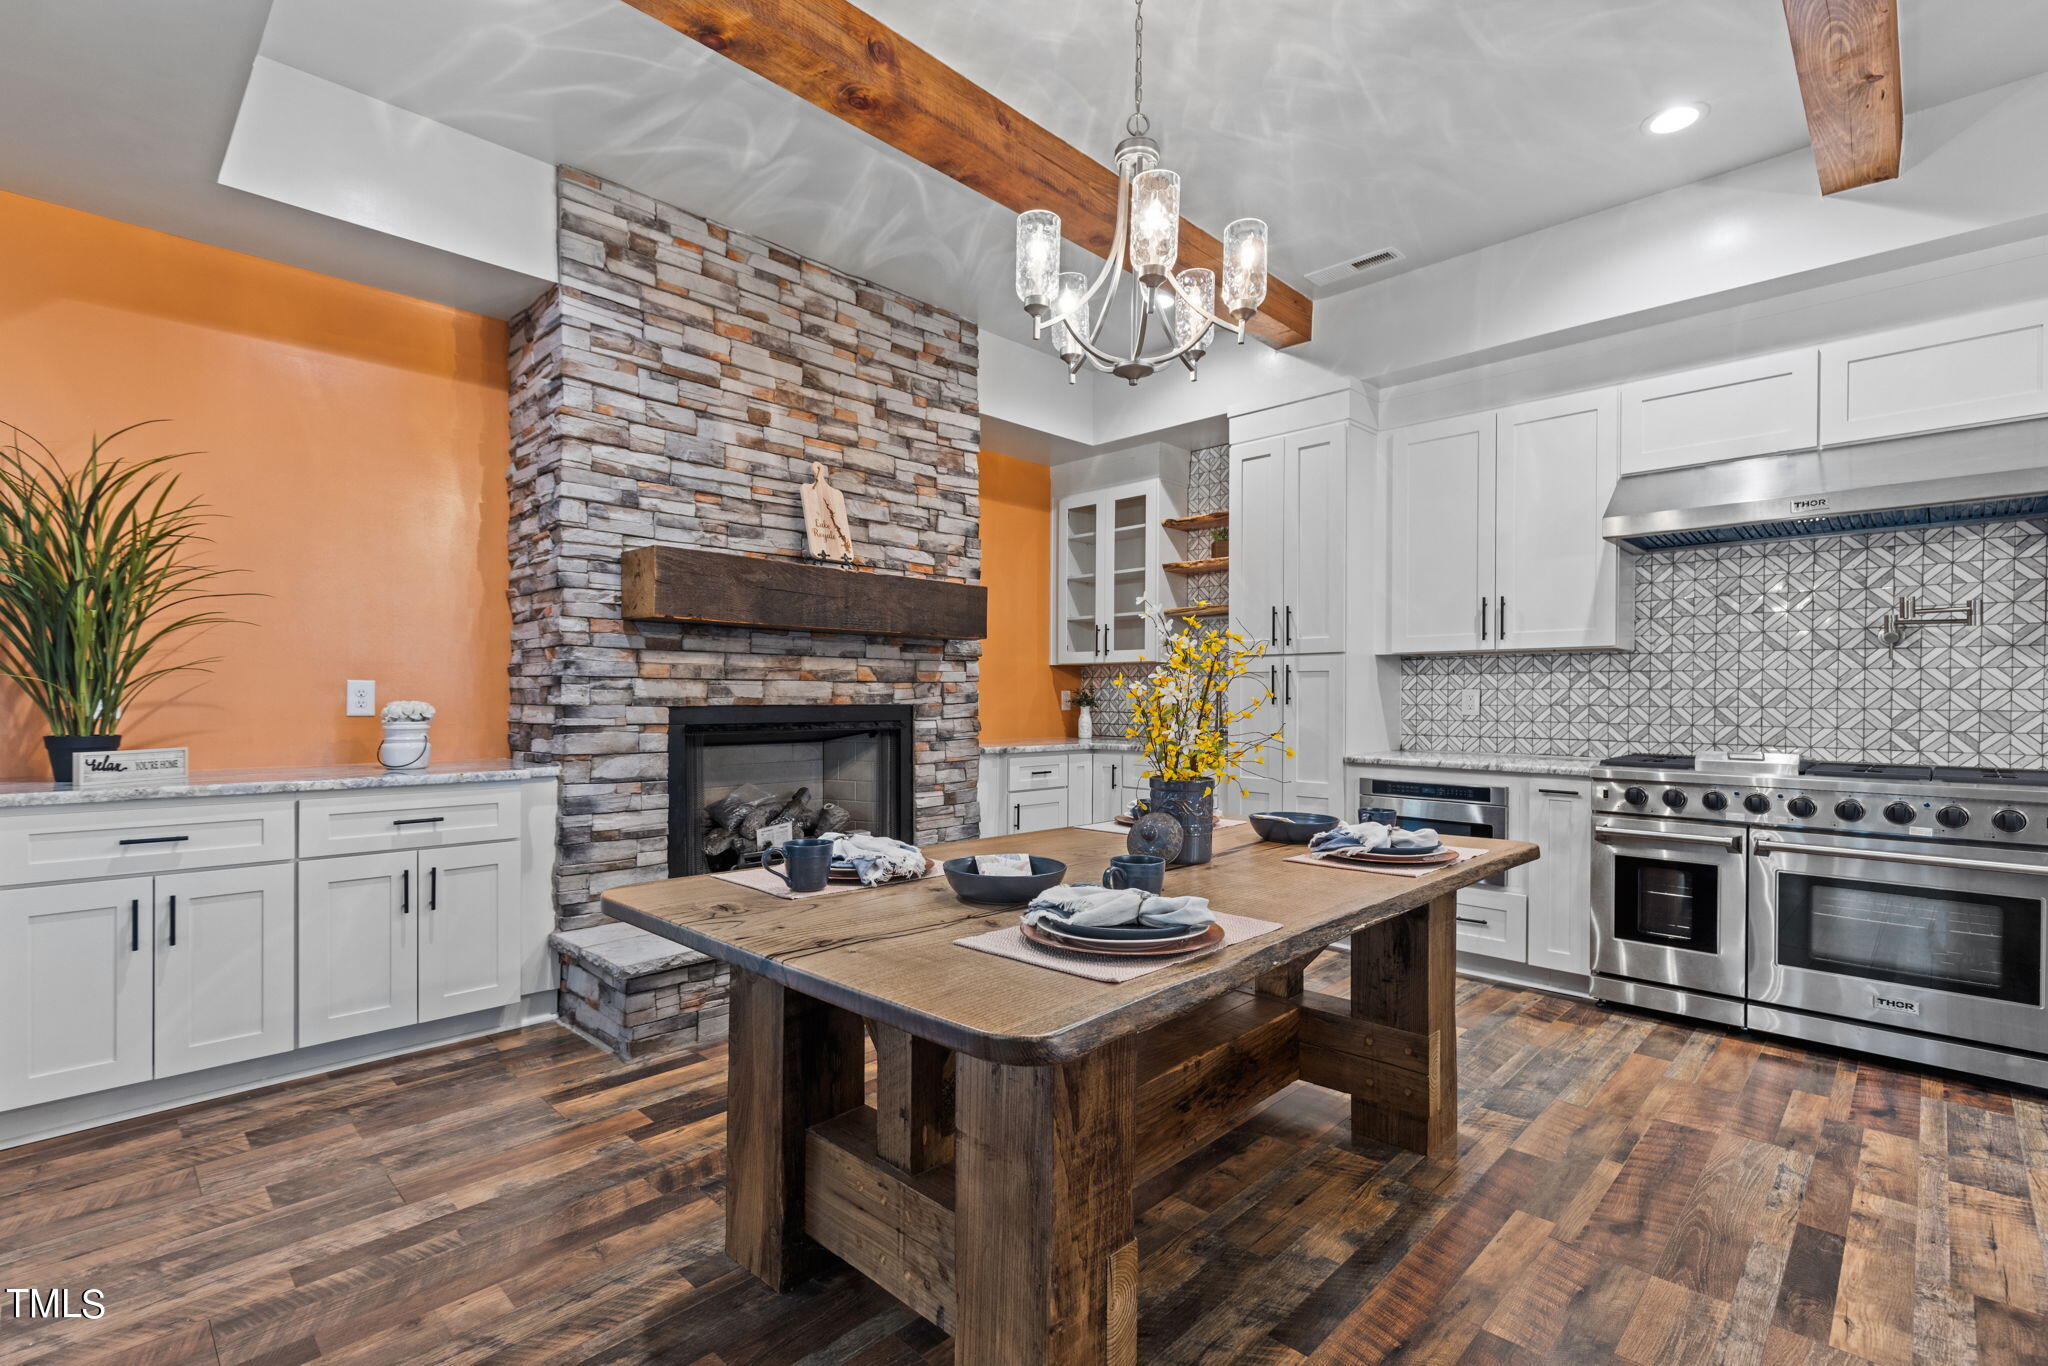 a open kitchen with a stove a sink dishwasher and a fireplace with wooden floor